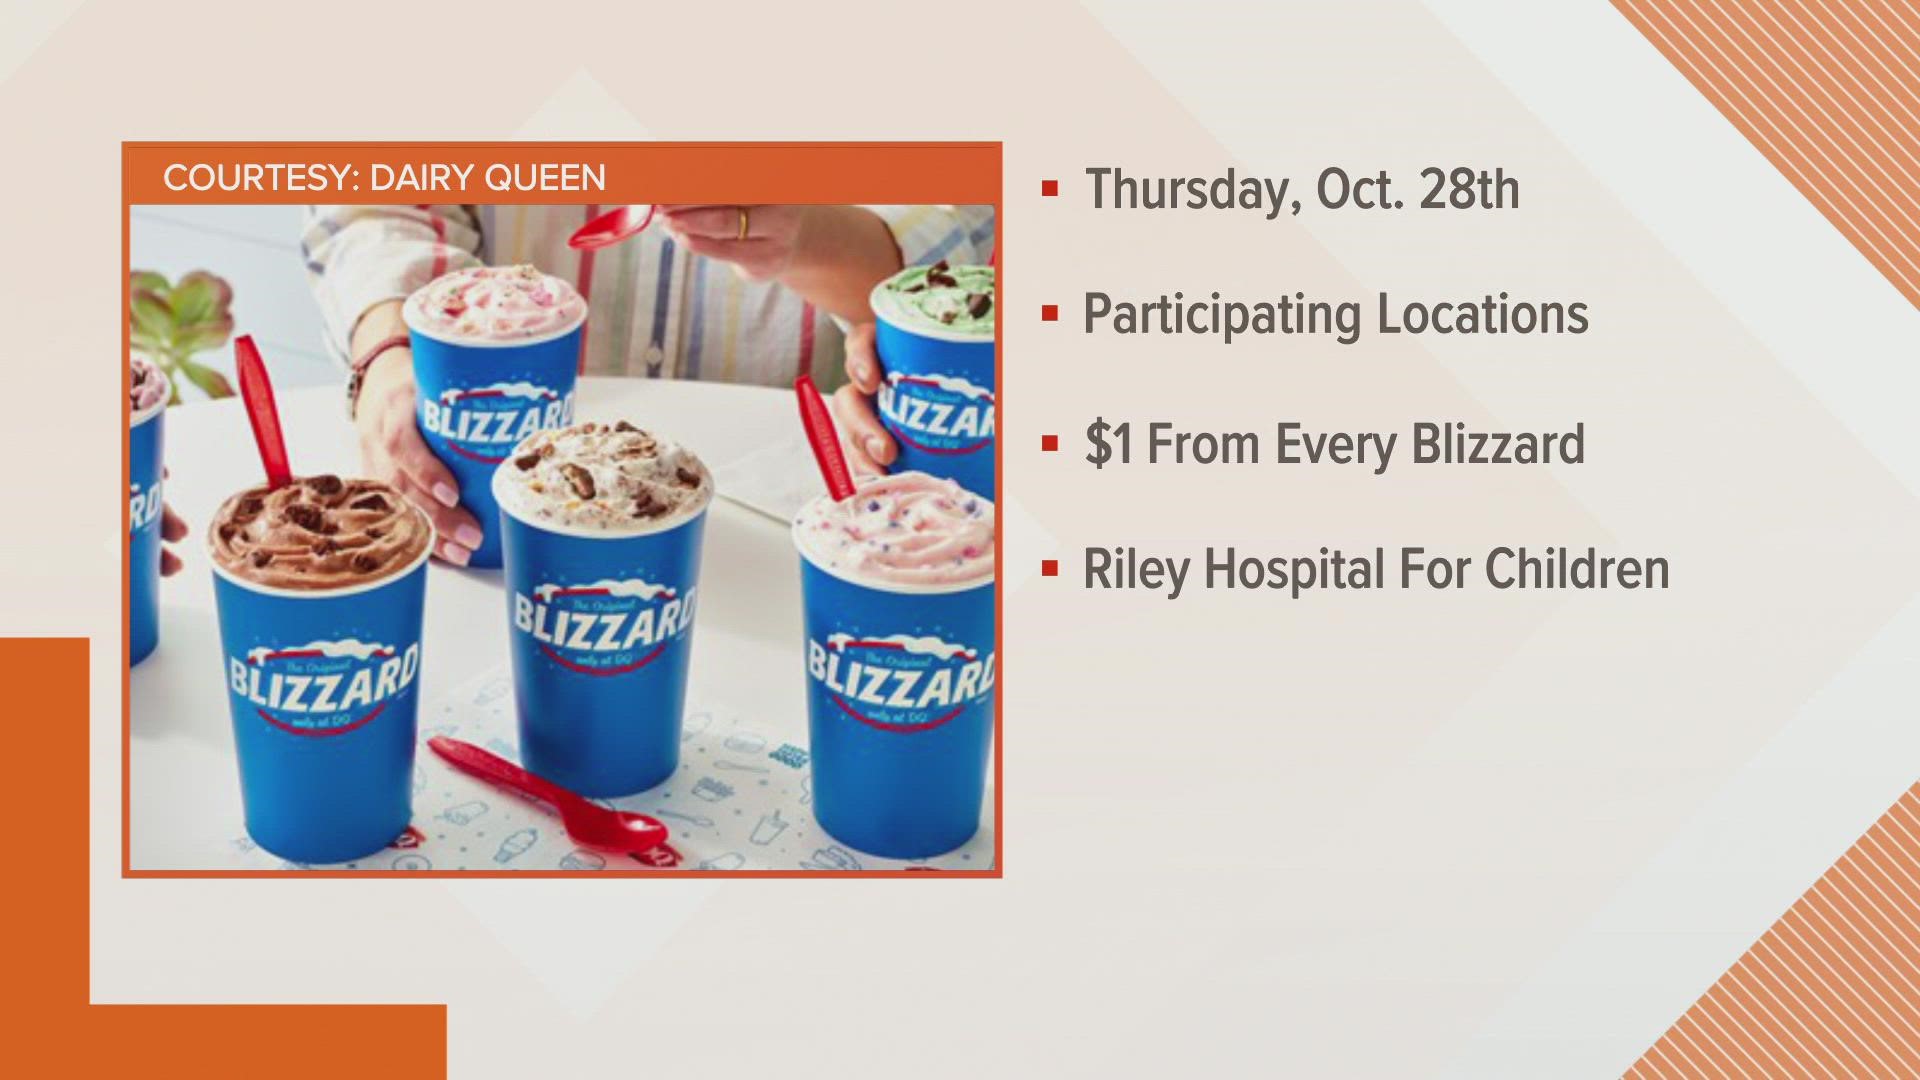 Participating Dairy Queen locations around the area will donate $1 or more for every Blizzard purchased Oct. 28.